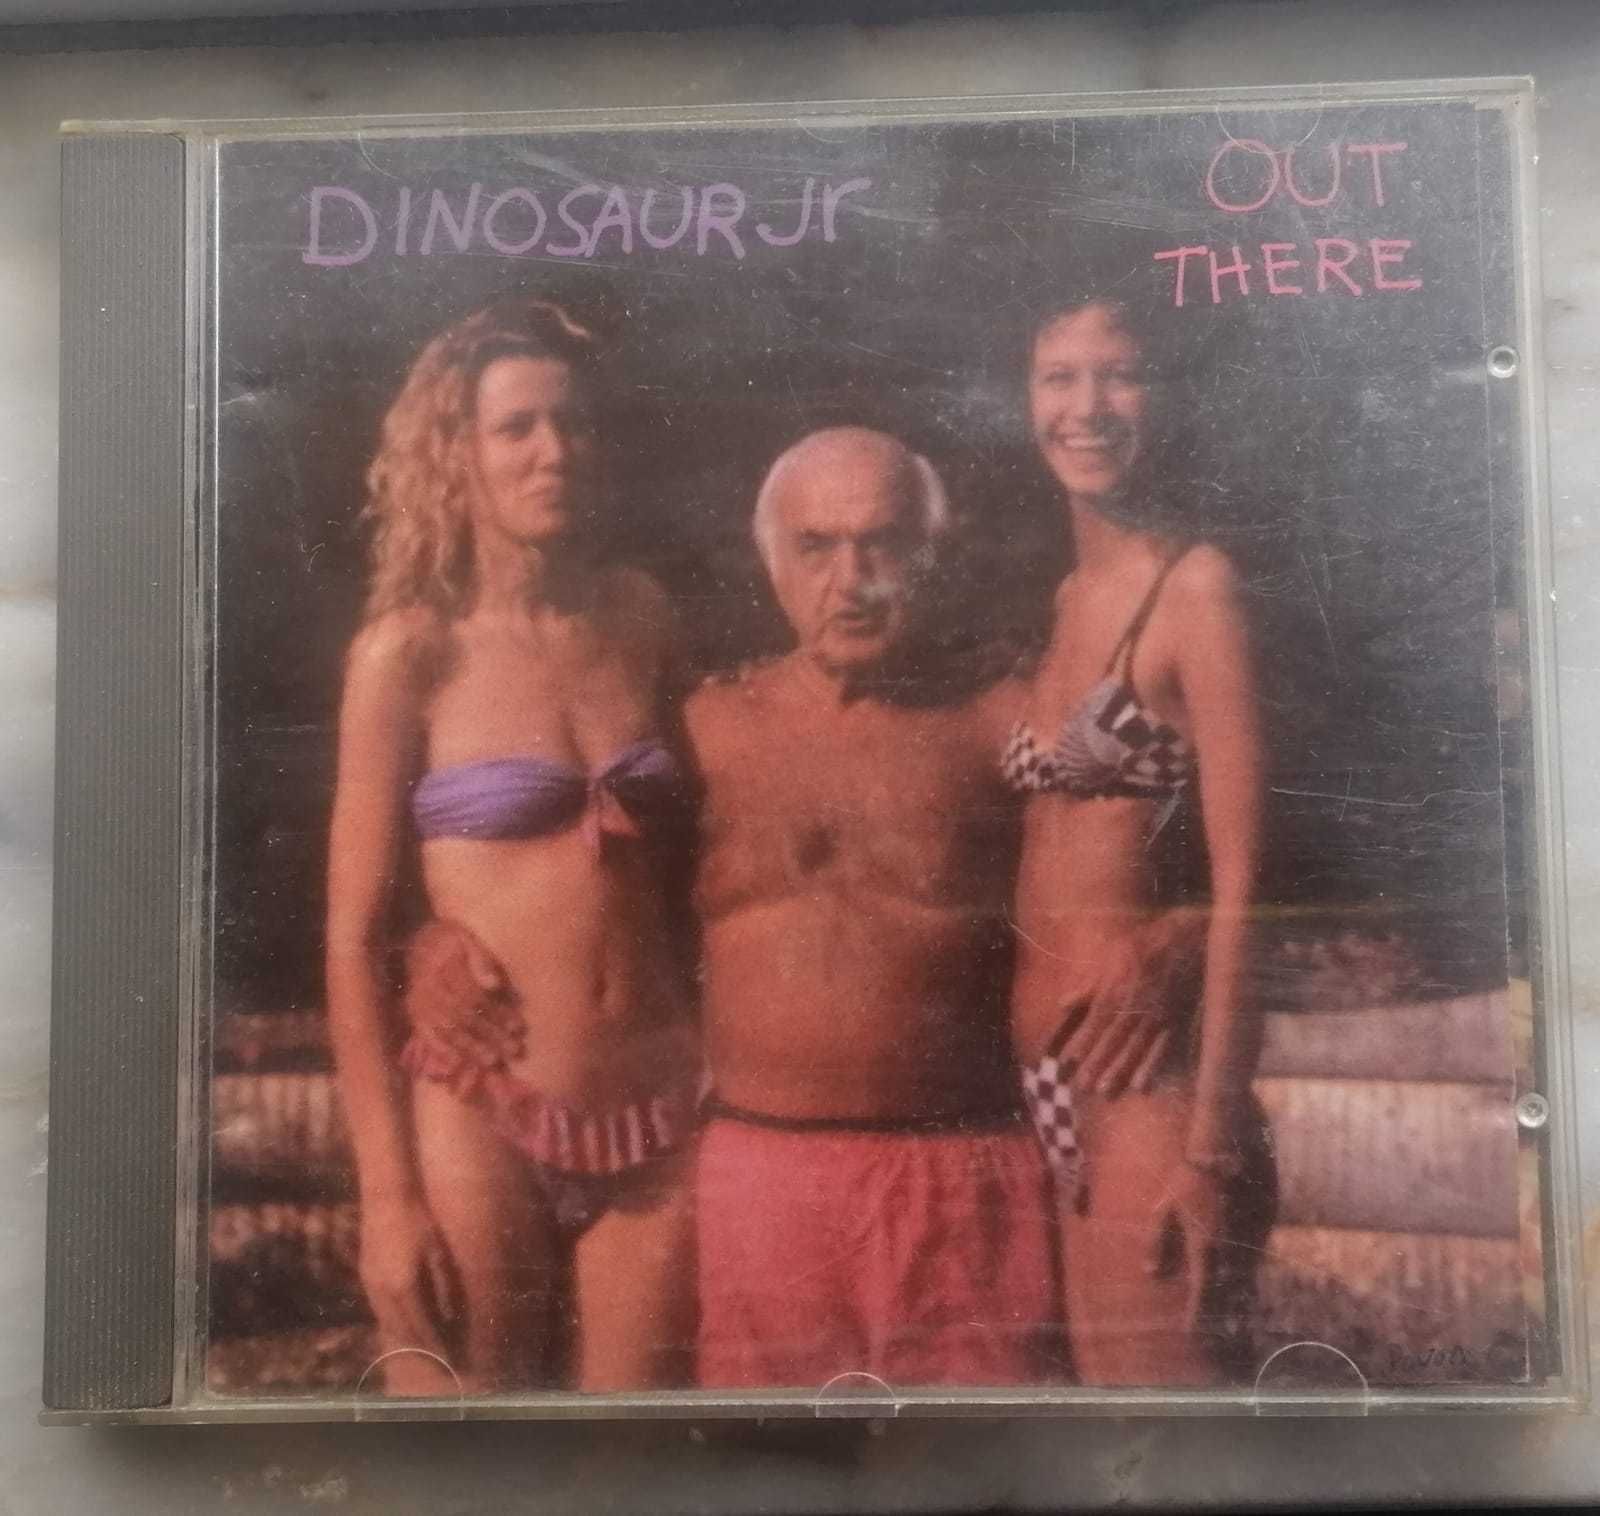 CD Dinosaur Jr "Out There"